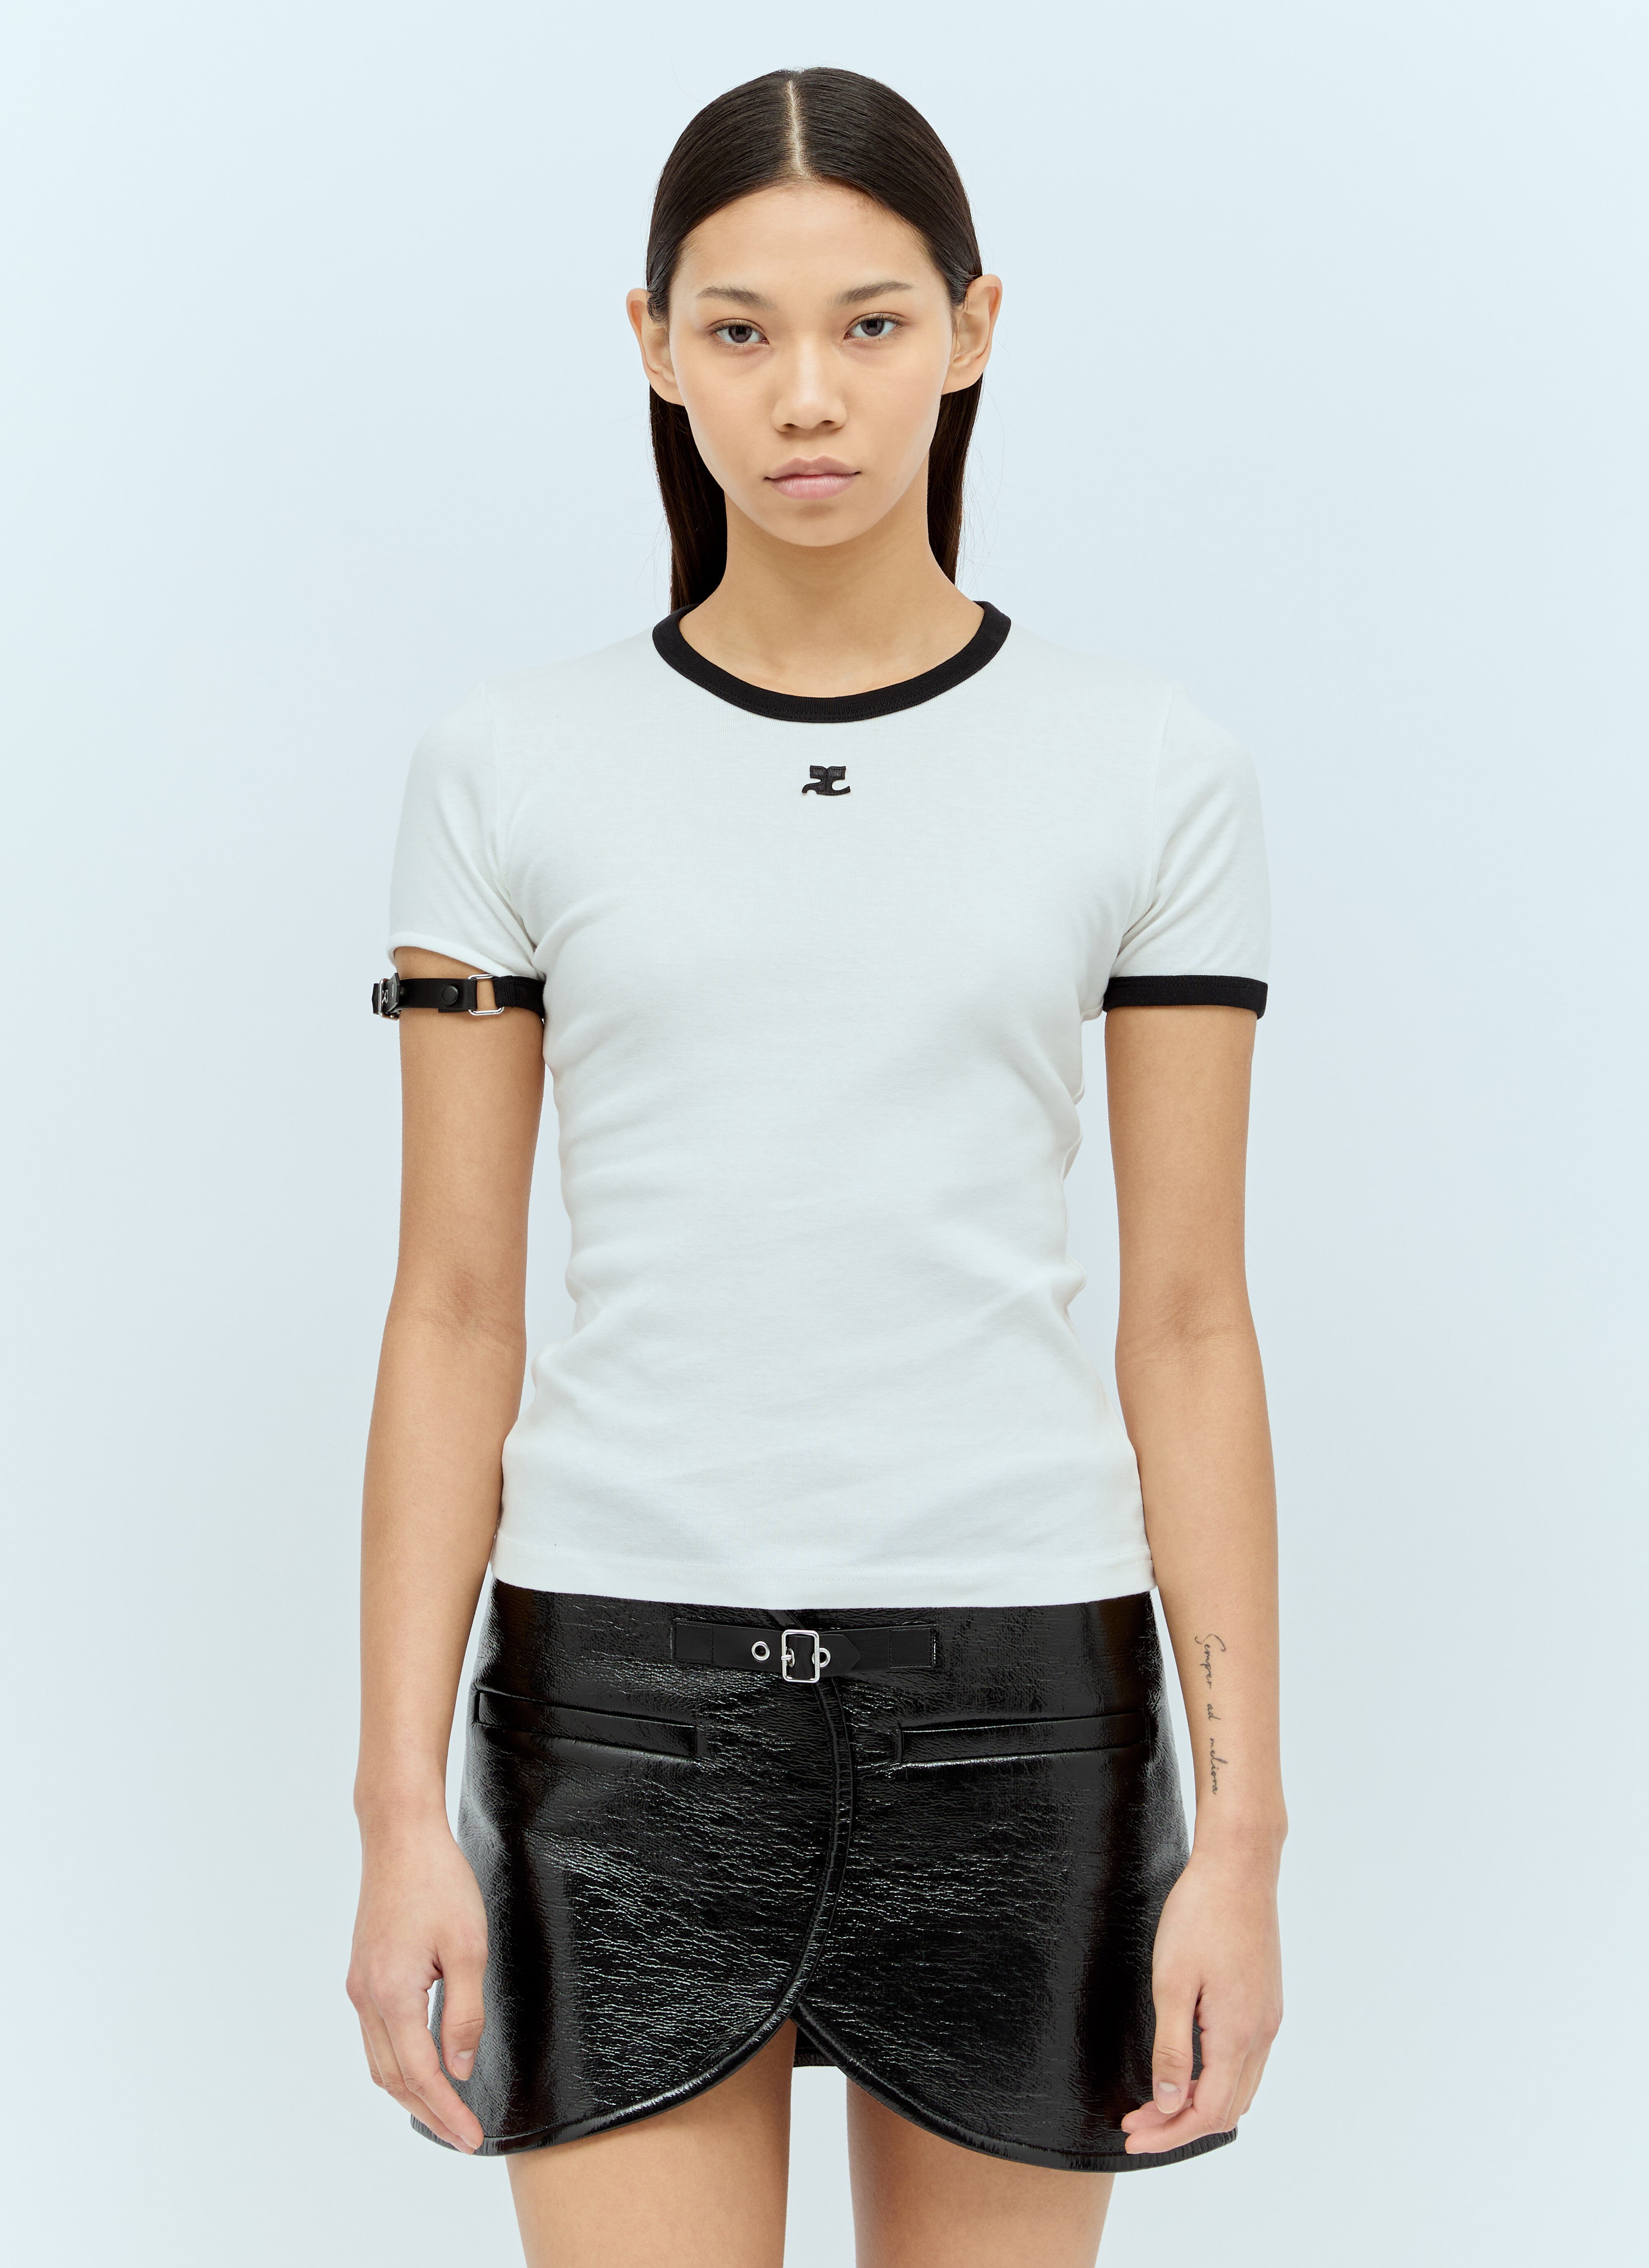 Courrèges バックルコントラストTシャツ ブルー cou0255005